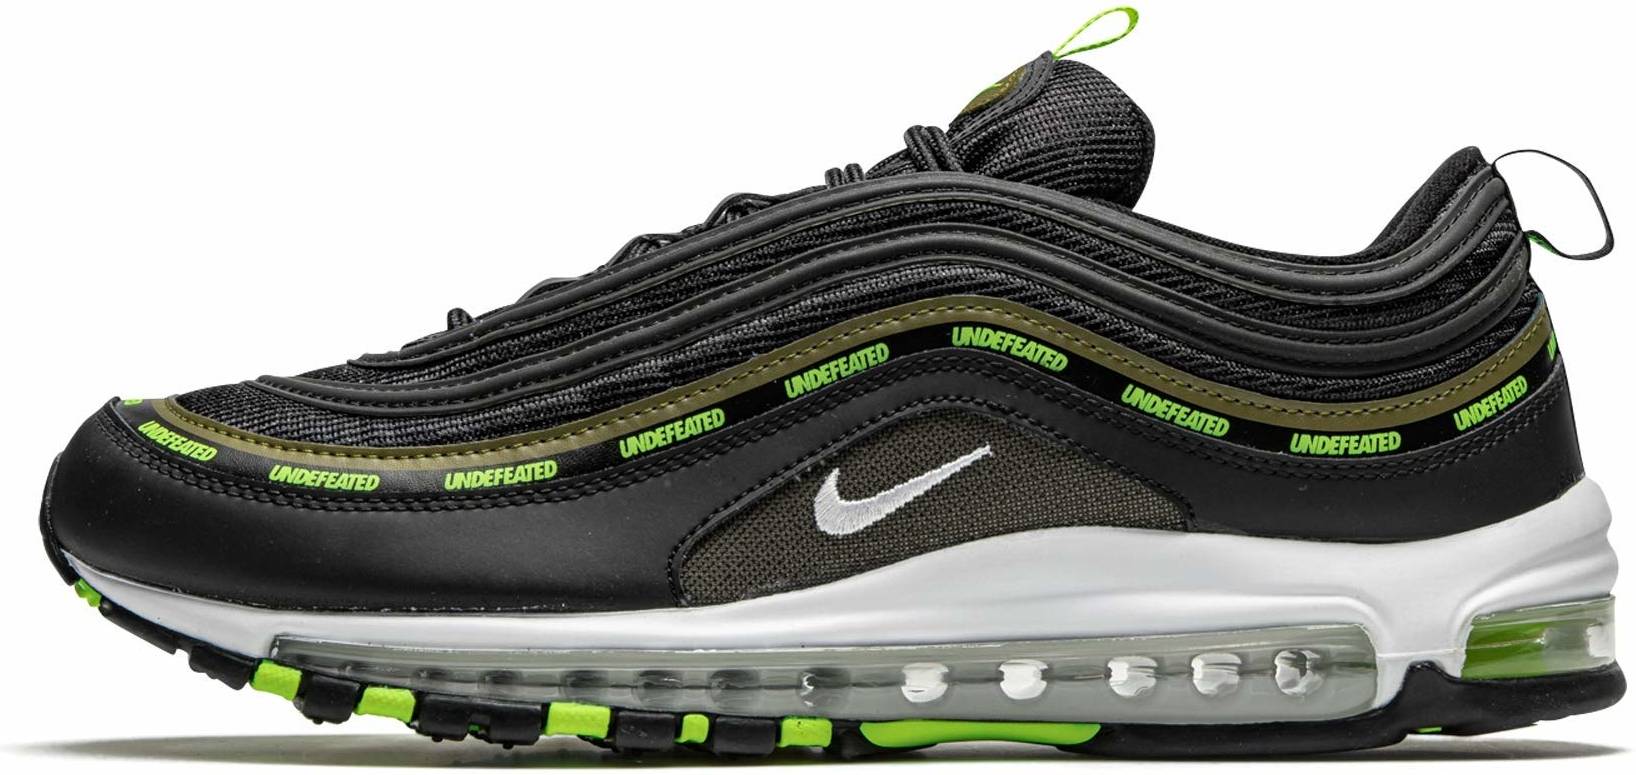 Nike Air Max 97 x Undefeated sneakers in 3 colors (only $169 